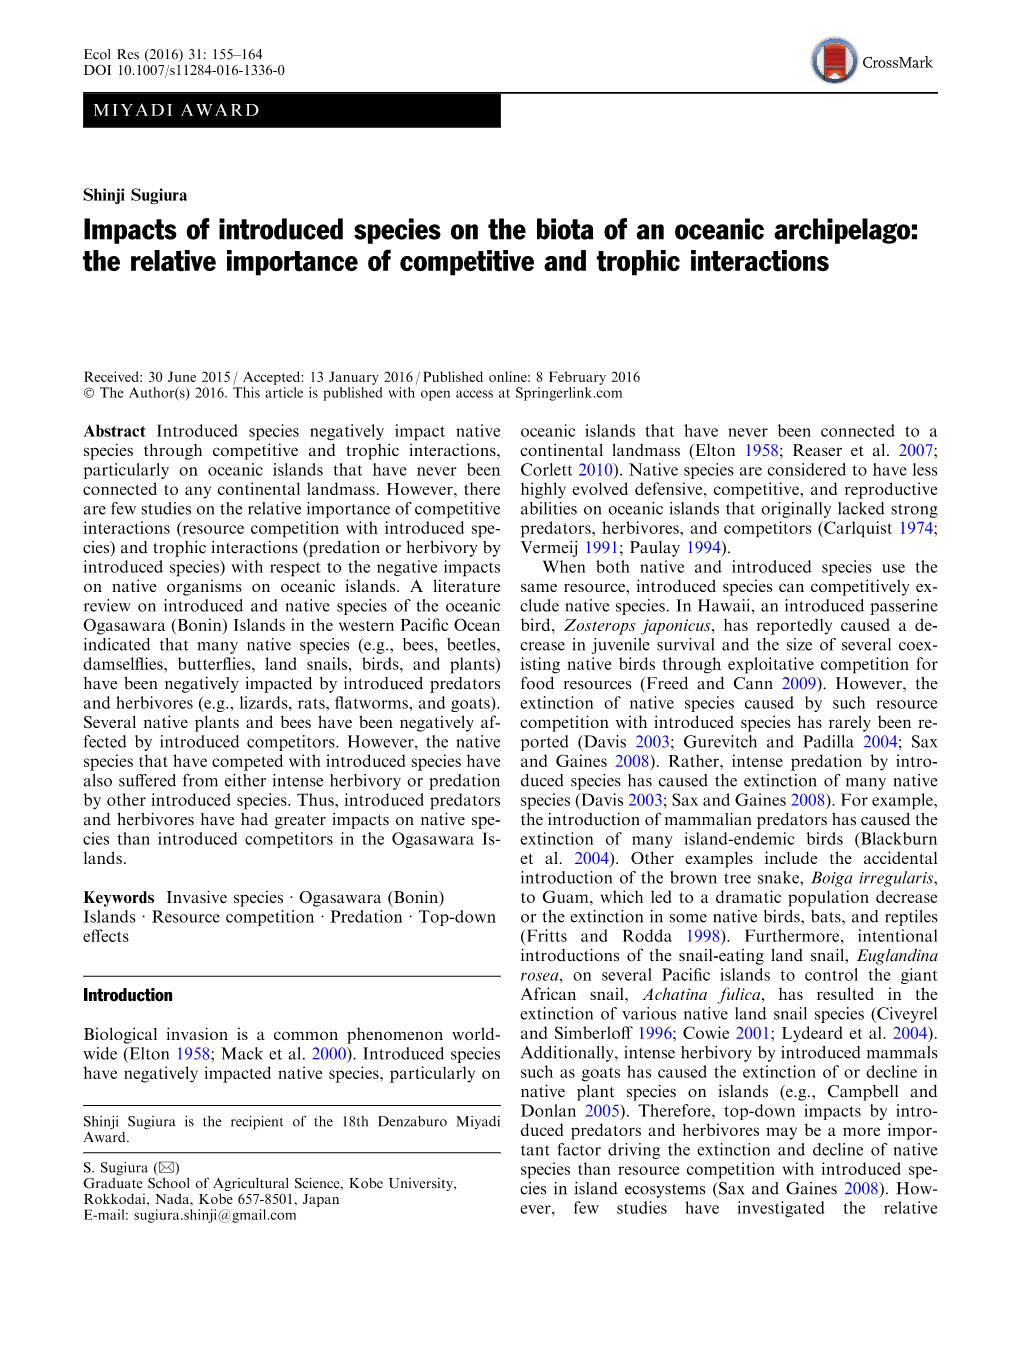 Impacts of Introduced Species on the Biota of an Oceanic Archipelago: the Relative Importance of Competitive and Trophic Interactions